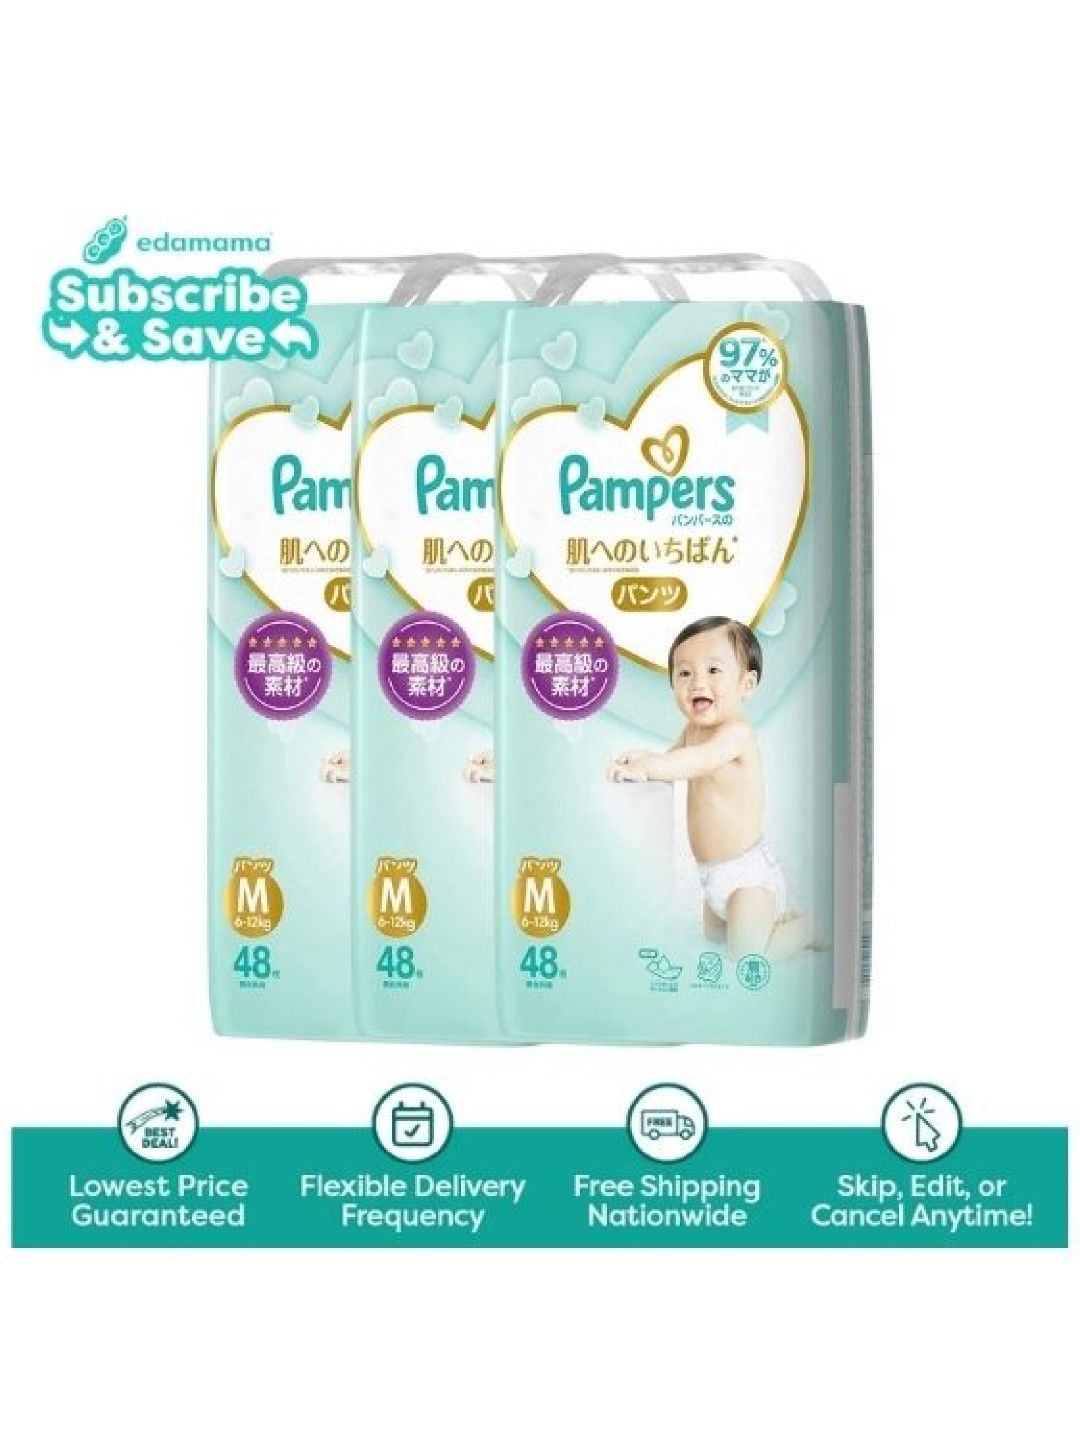 Buy Pampers Premium Care Pants, Medium size baby diapers (MD), 16 Count,  Softest ever Pampers pants & Babyhug Premium Baby Lemon Wipes - 72 Pieces  Online at Firstcry.com